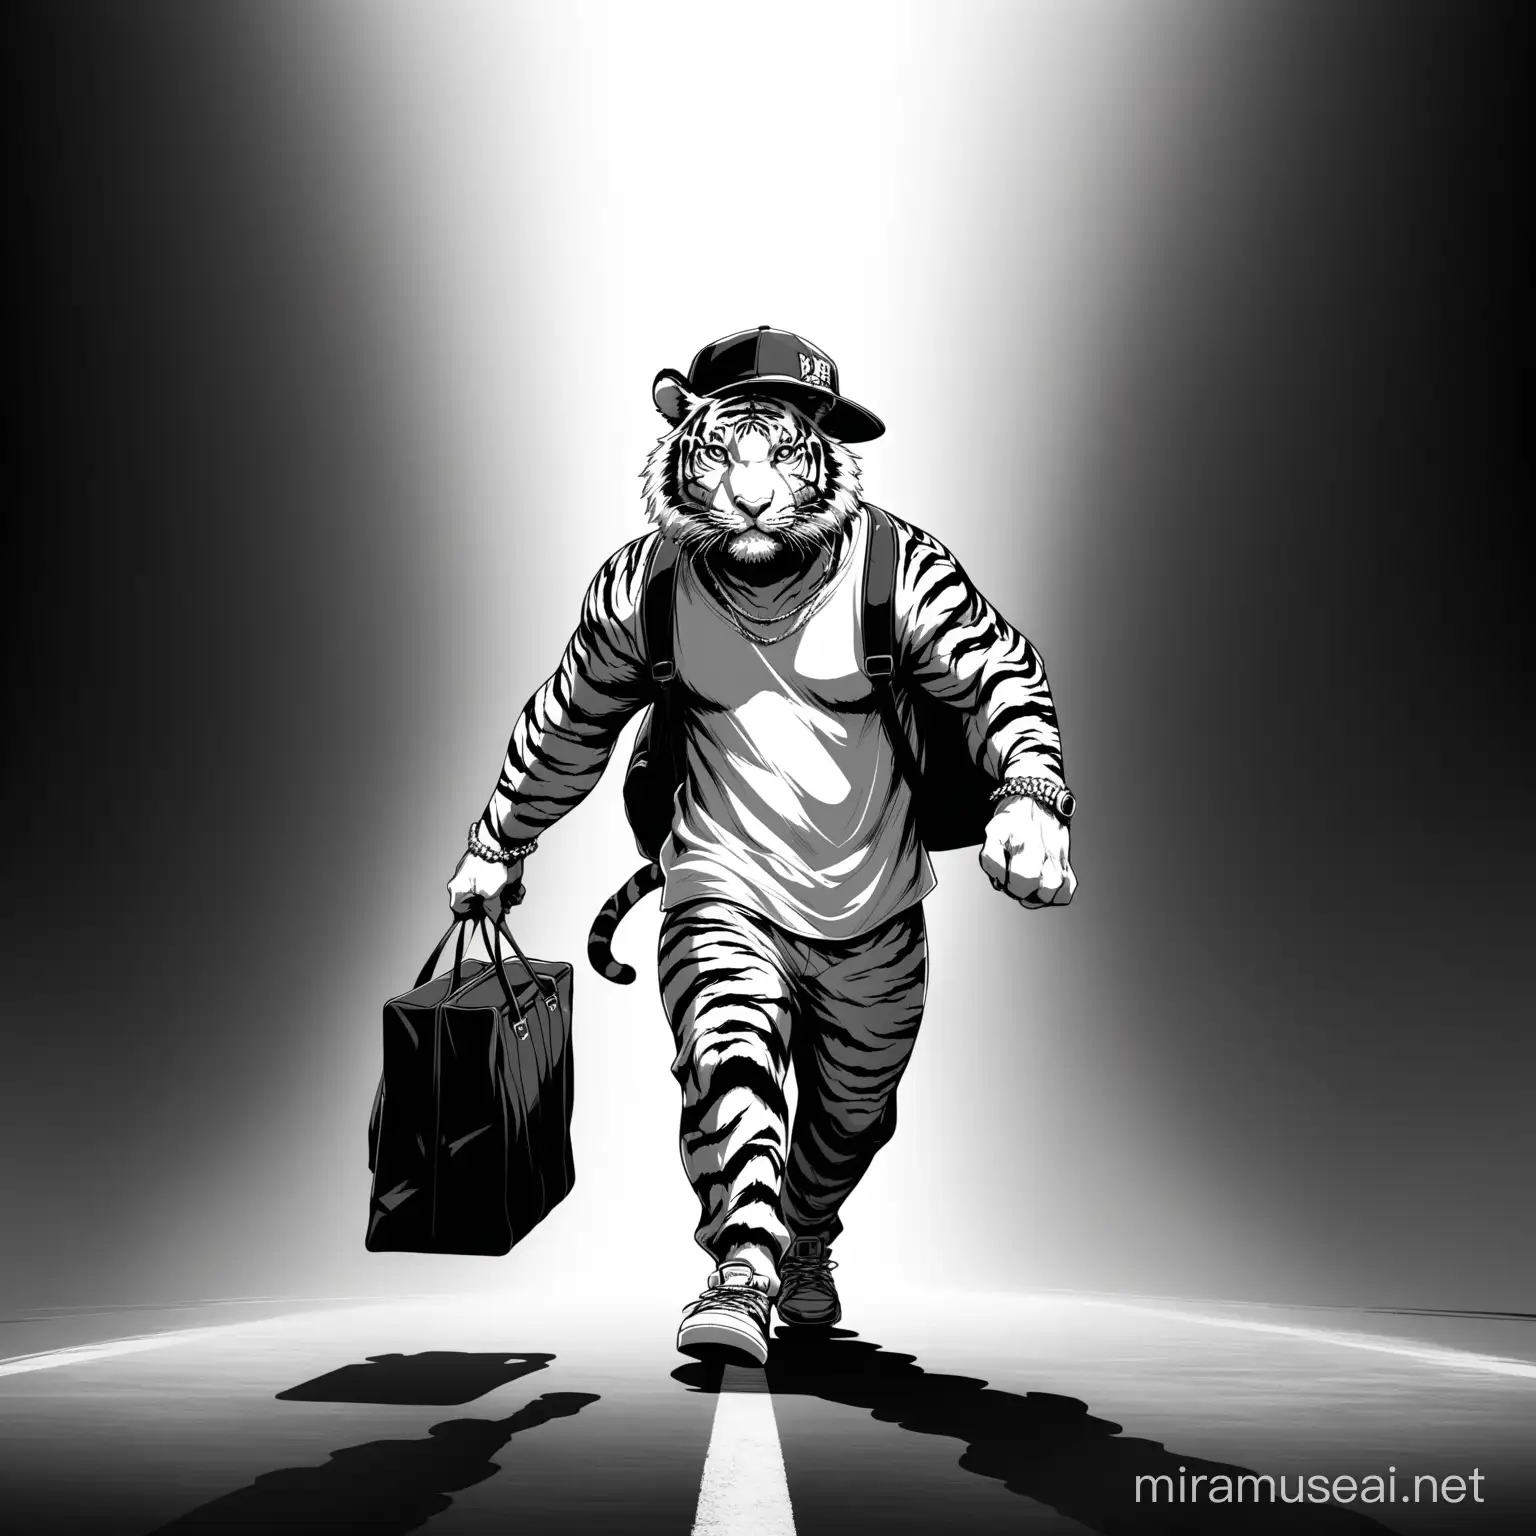 Cool HipHop Tiger Walking with Bag and Hat in Monochrome